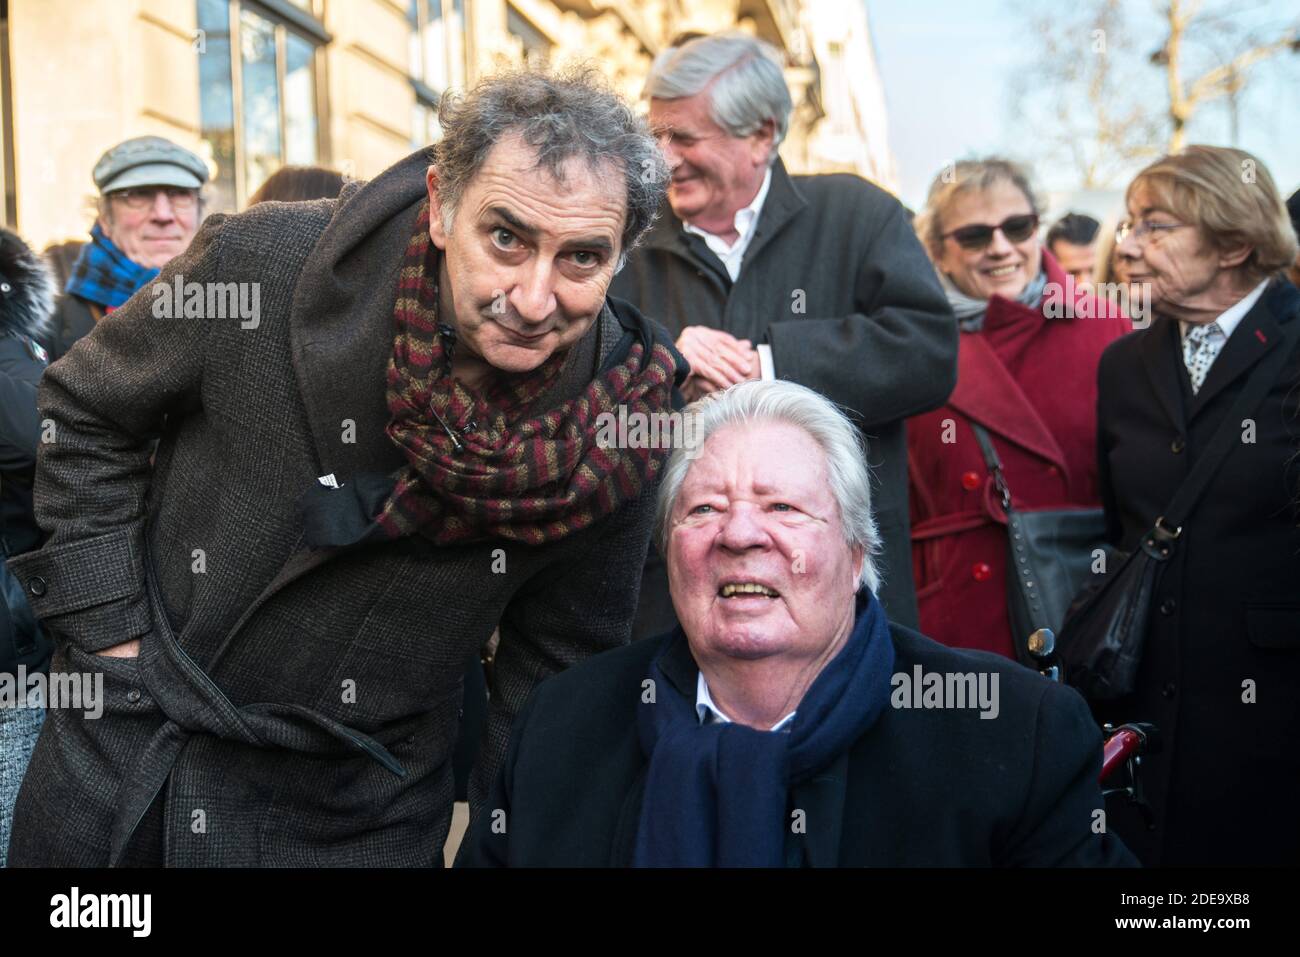 Jean-Jacques Sempe (seated) attends the unveiling of a wall fresco from one of his artwork, along side François Morel, at the crossing of Boulevard des Filles du Calvaire and Rue Froissard, 3rd District of Paris, France, Febuary 16, 2019. Photo by Denis PrezatAvenir Pictures/ABACAPRESS.COM Stock Photo